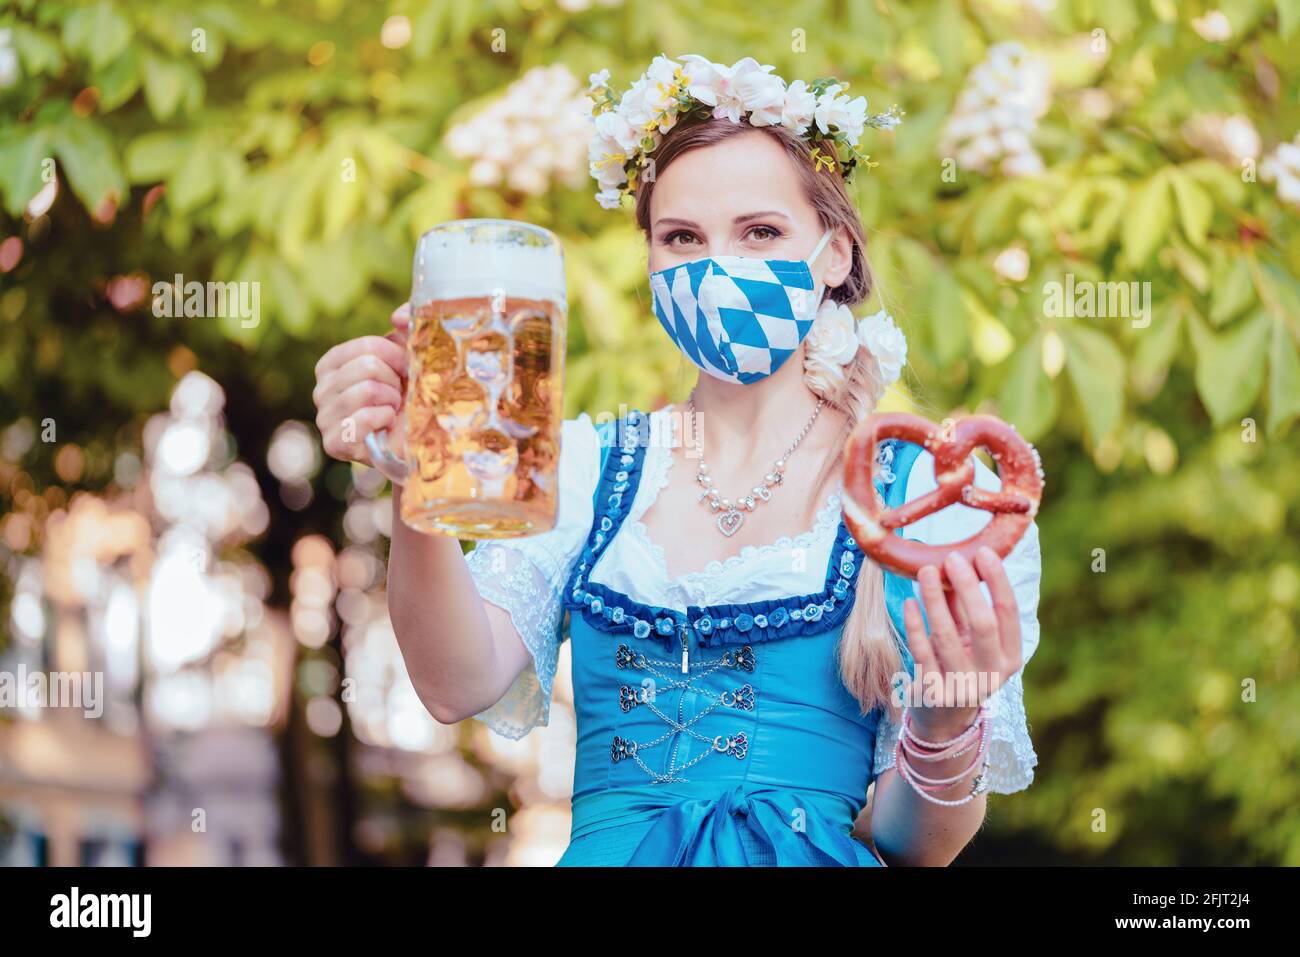 Bavarian woman toasting with beer during covid 19 Stock Photo